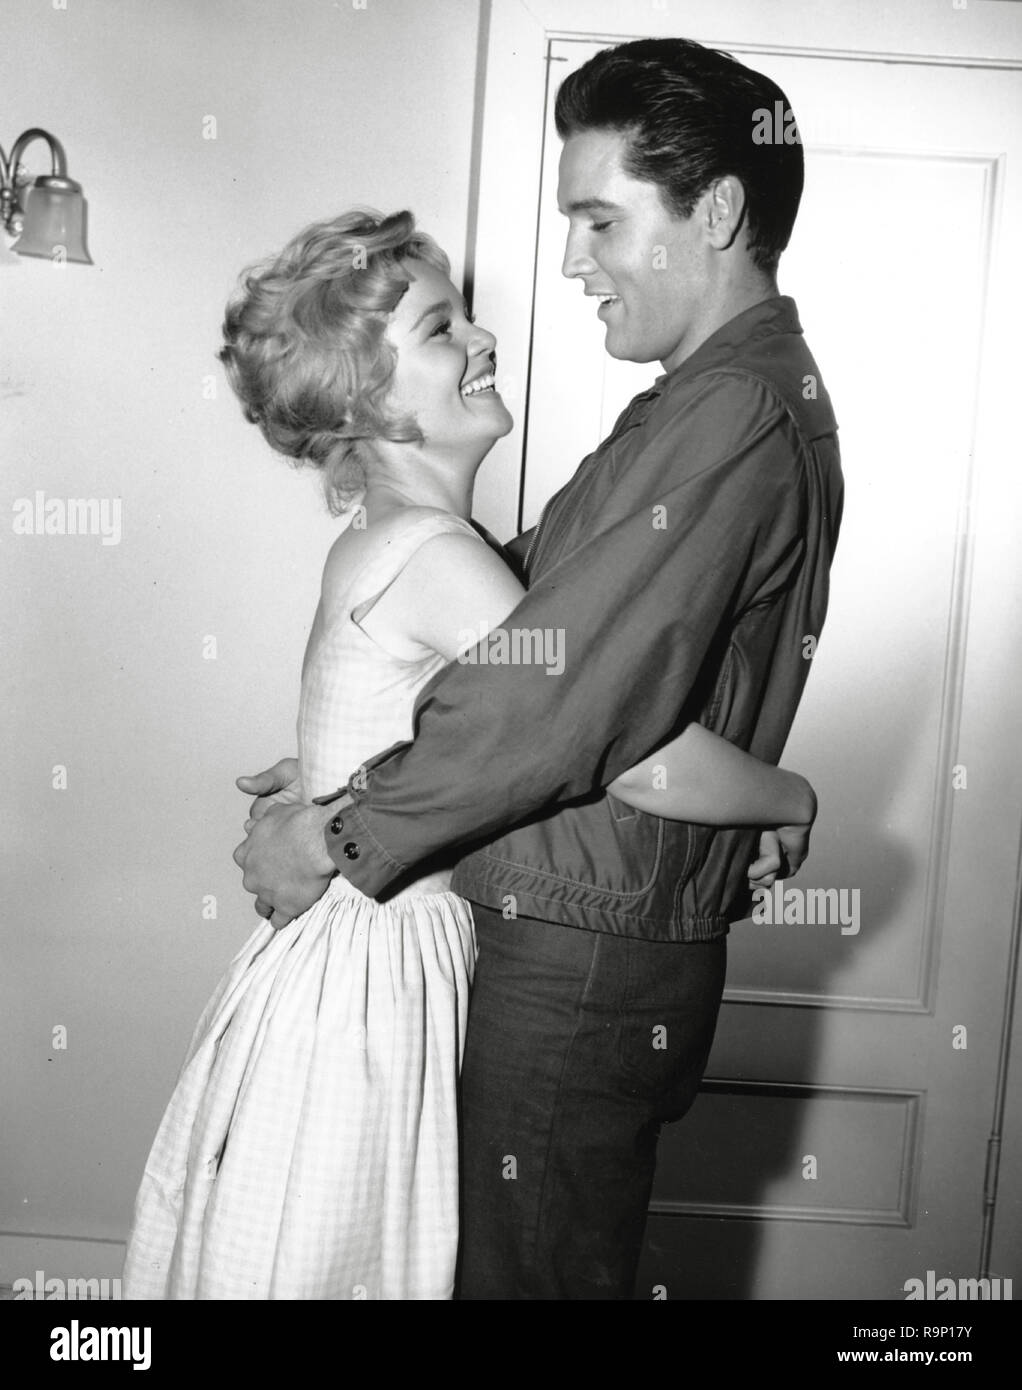 elvis and tuesday weld <3 : r/Elvis